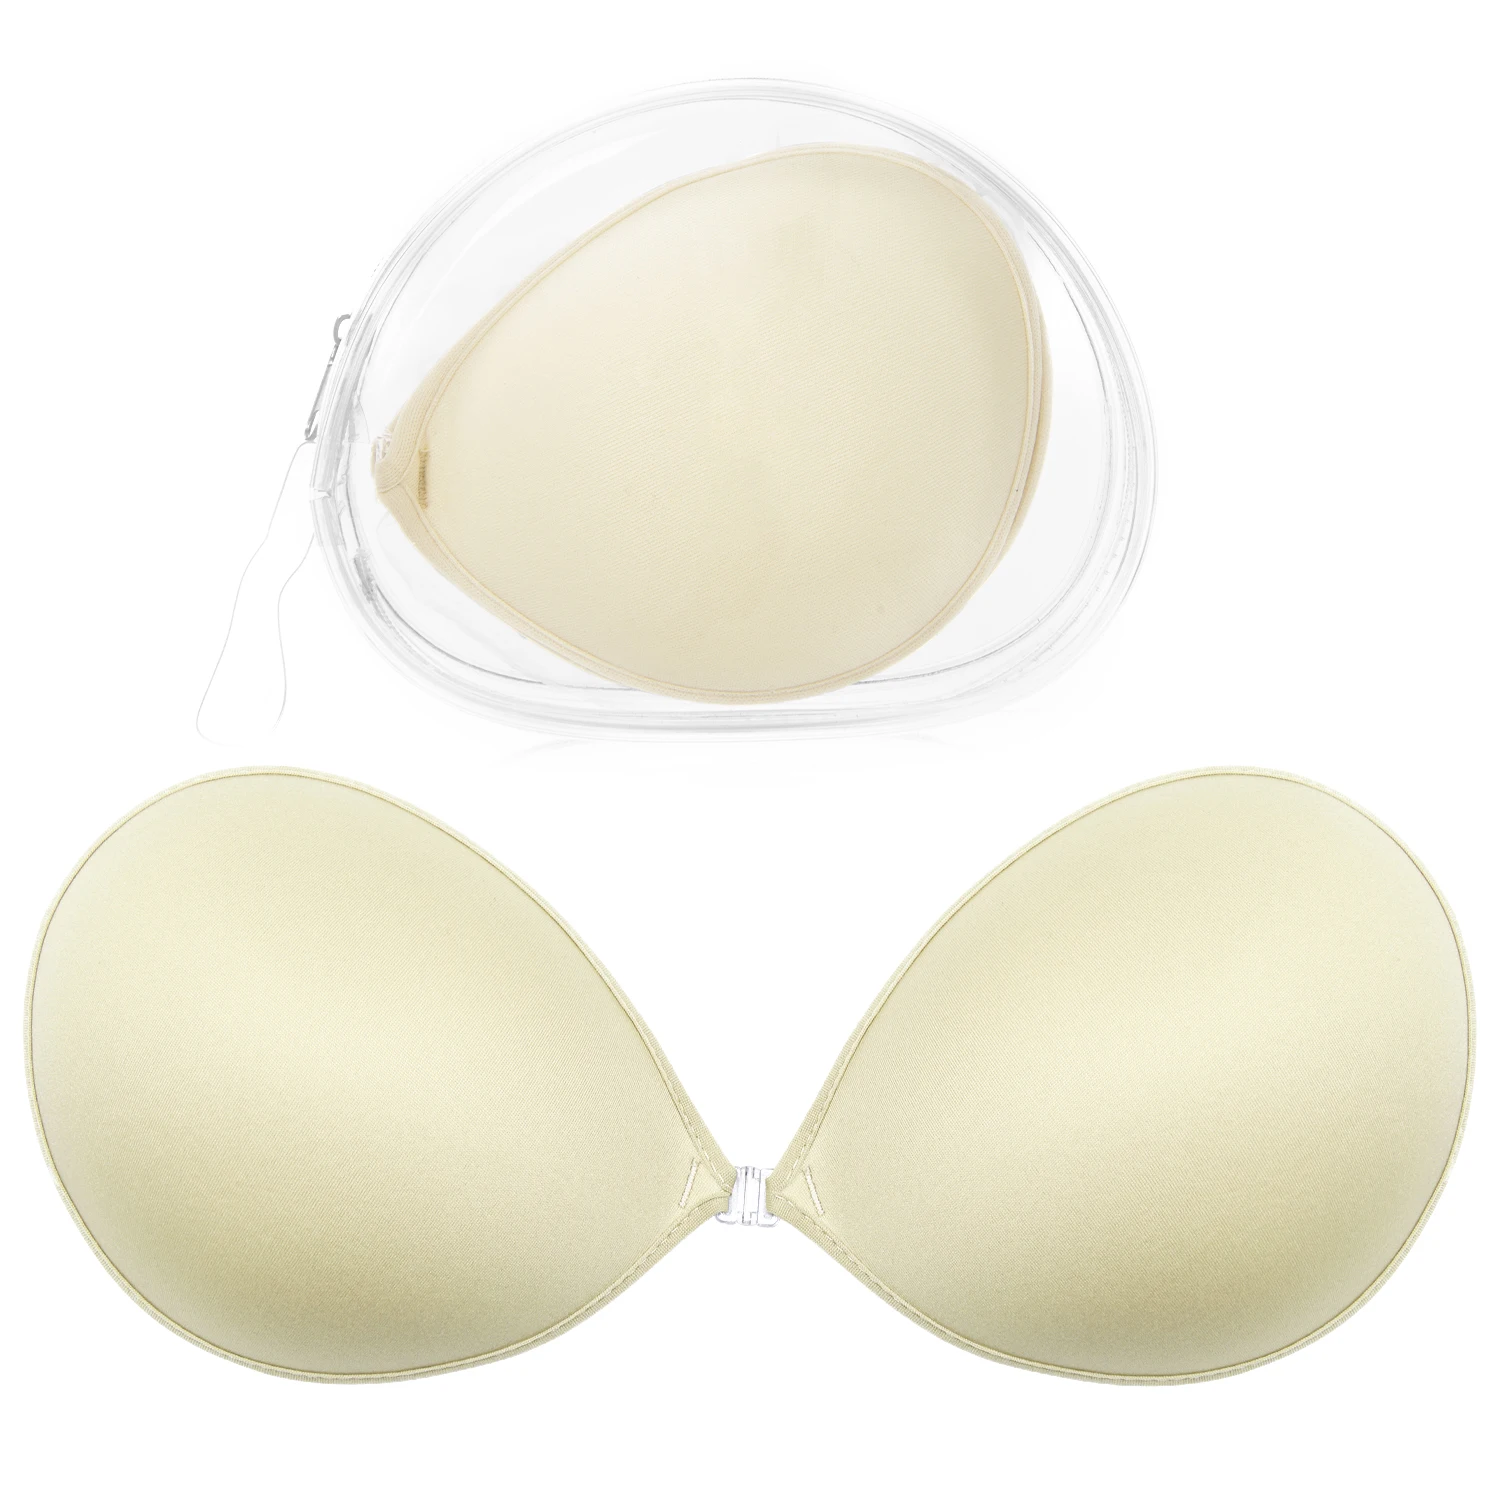 https://ae01.alicdn.com/kf/Sc8192e93837f47c1bca4be5f1de53e0aP/Wingslove-Adhesive-Bra-Reusable-Strapless-Self-Silicone-Push-up-Invisible-Sticky-Backless-Naked-Back-Nipple-Pad.jpg